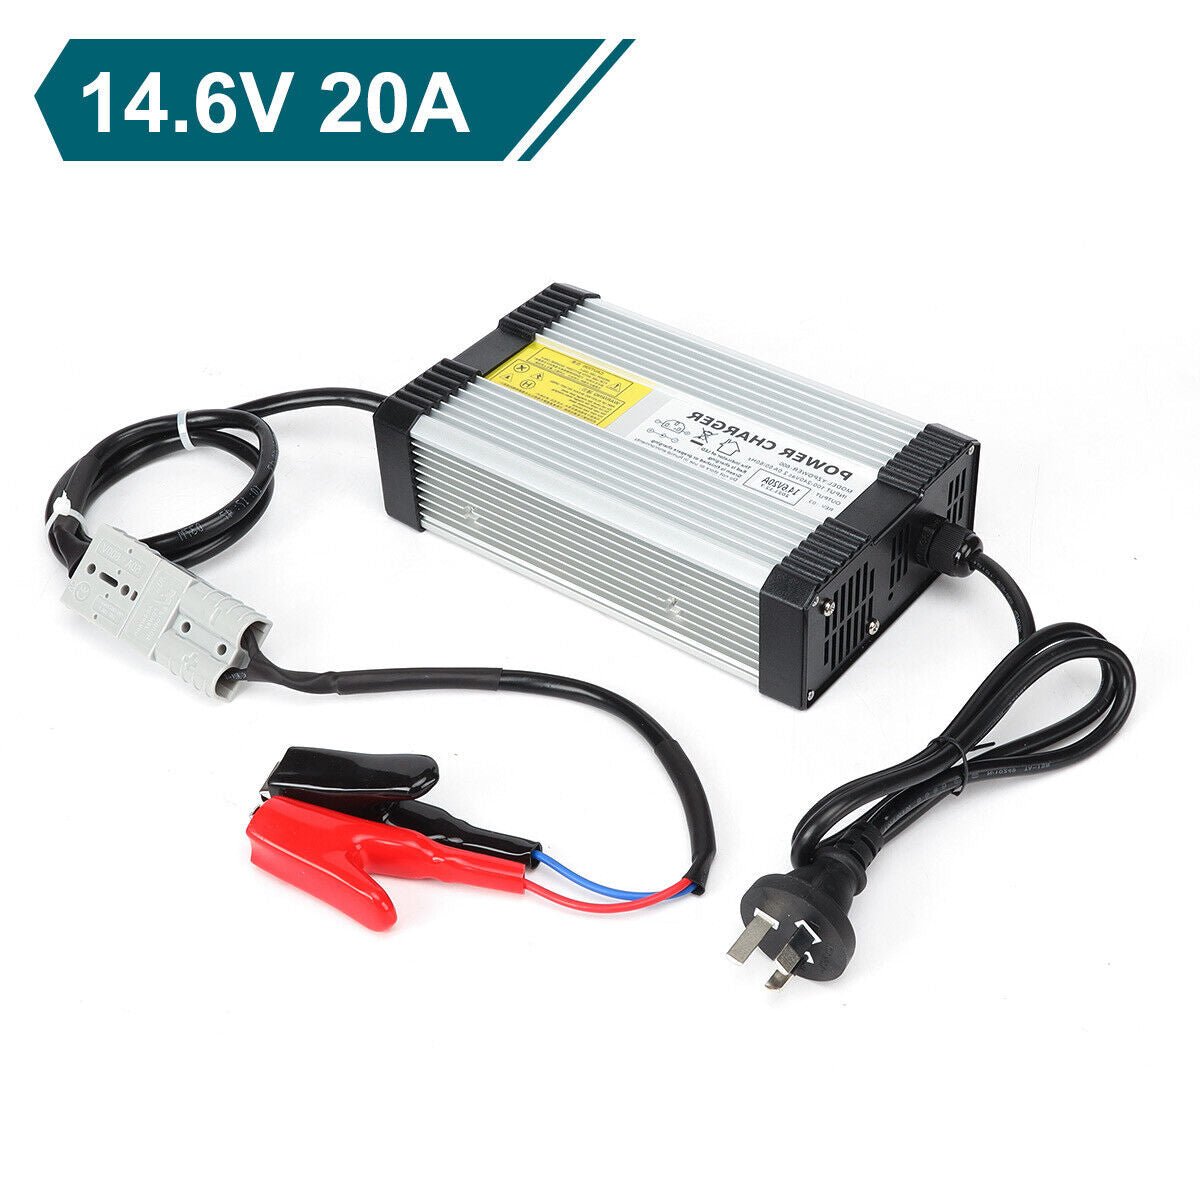 14.6V 12V 20A Lithium Battery Charger For LiFePO4 Lithium Iron Plug Kit - Office Catch